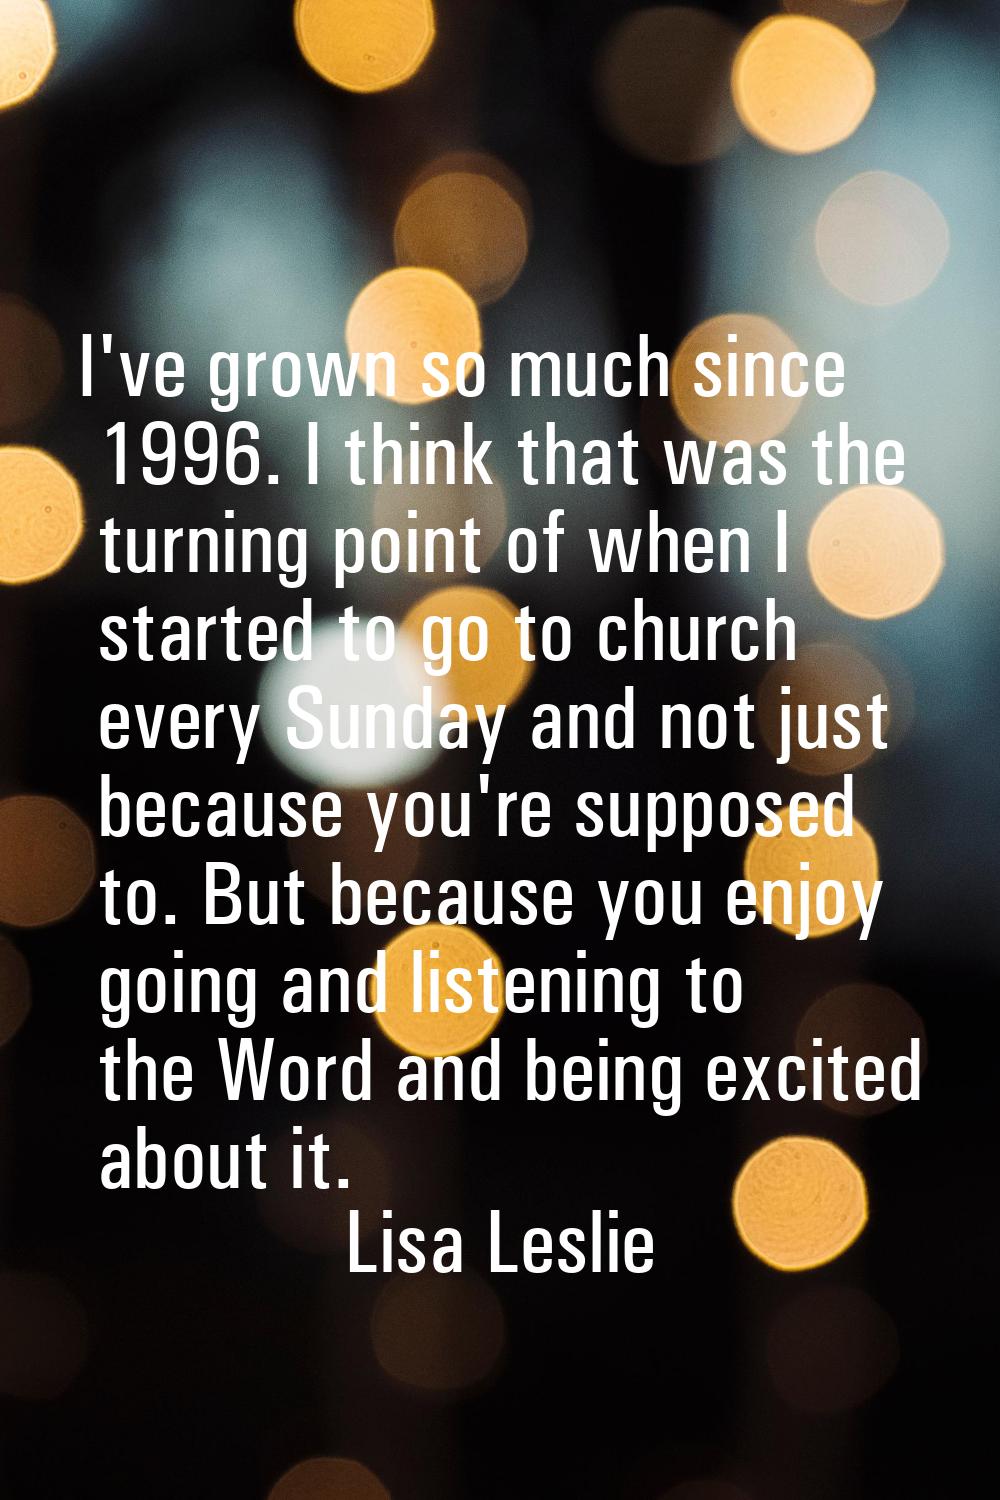 I've grown so much since 1996. I think that was the turning point of when I started to go to church